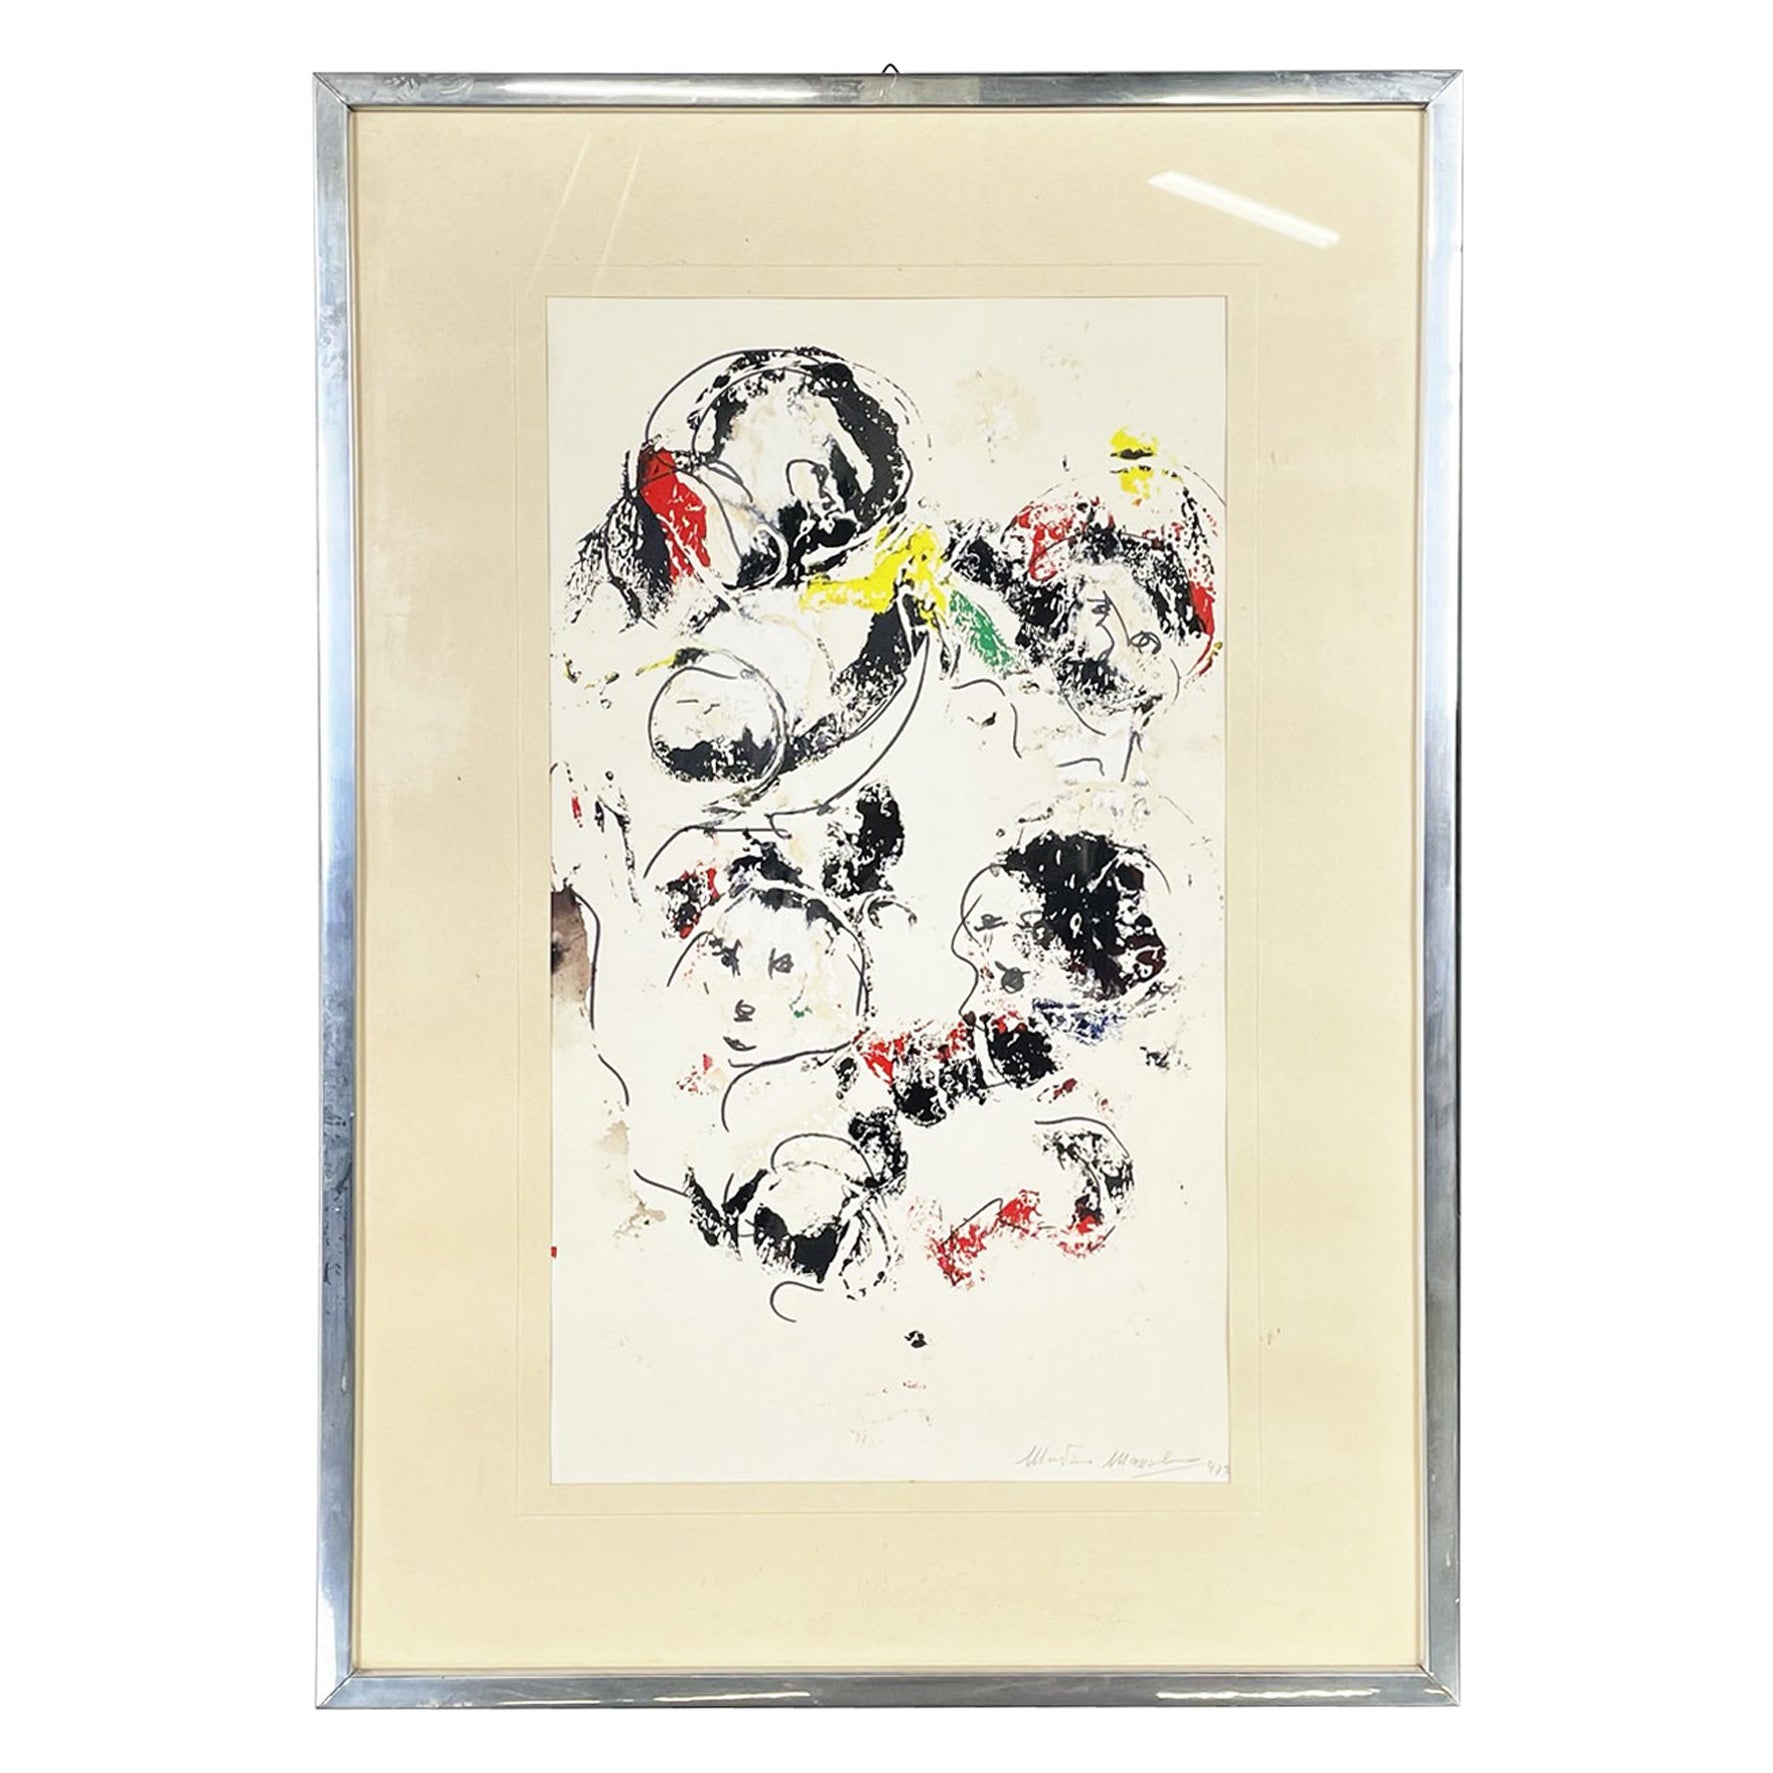 Italian Modern Abstract Mixed Media Painting on Paper and Metal Frame, 1972